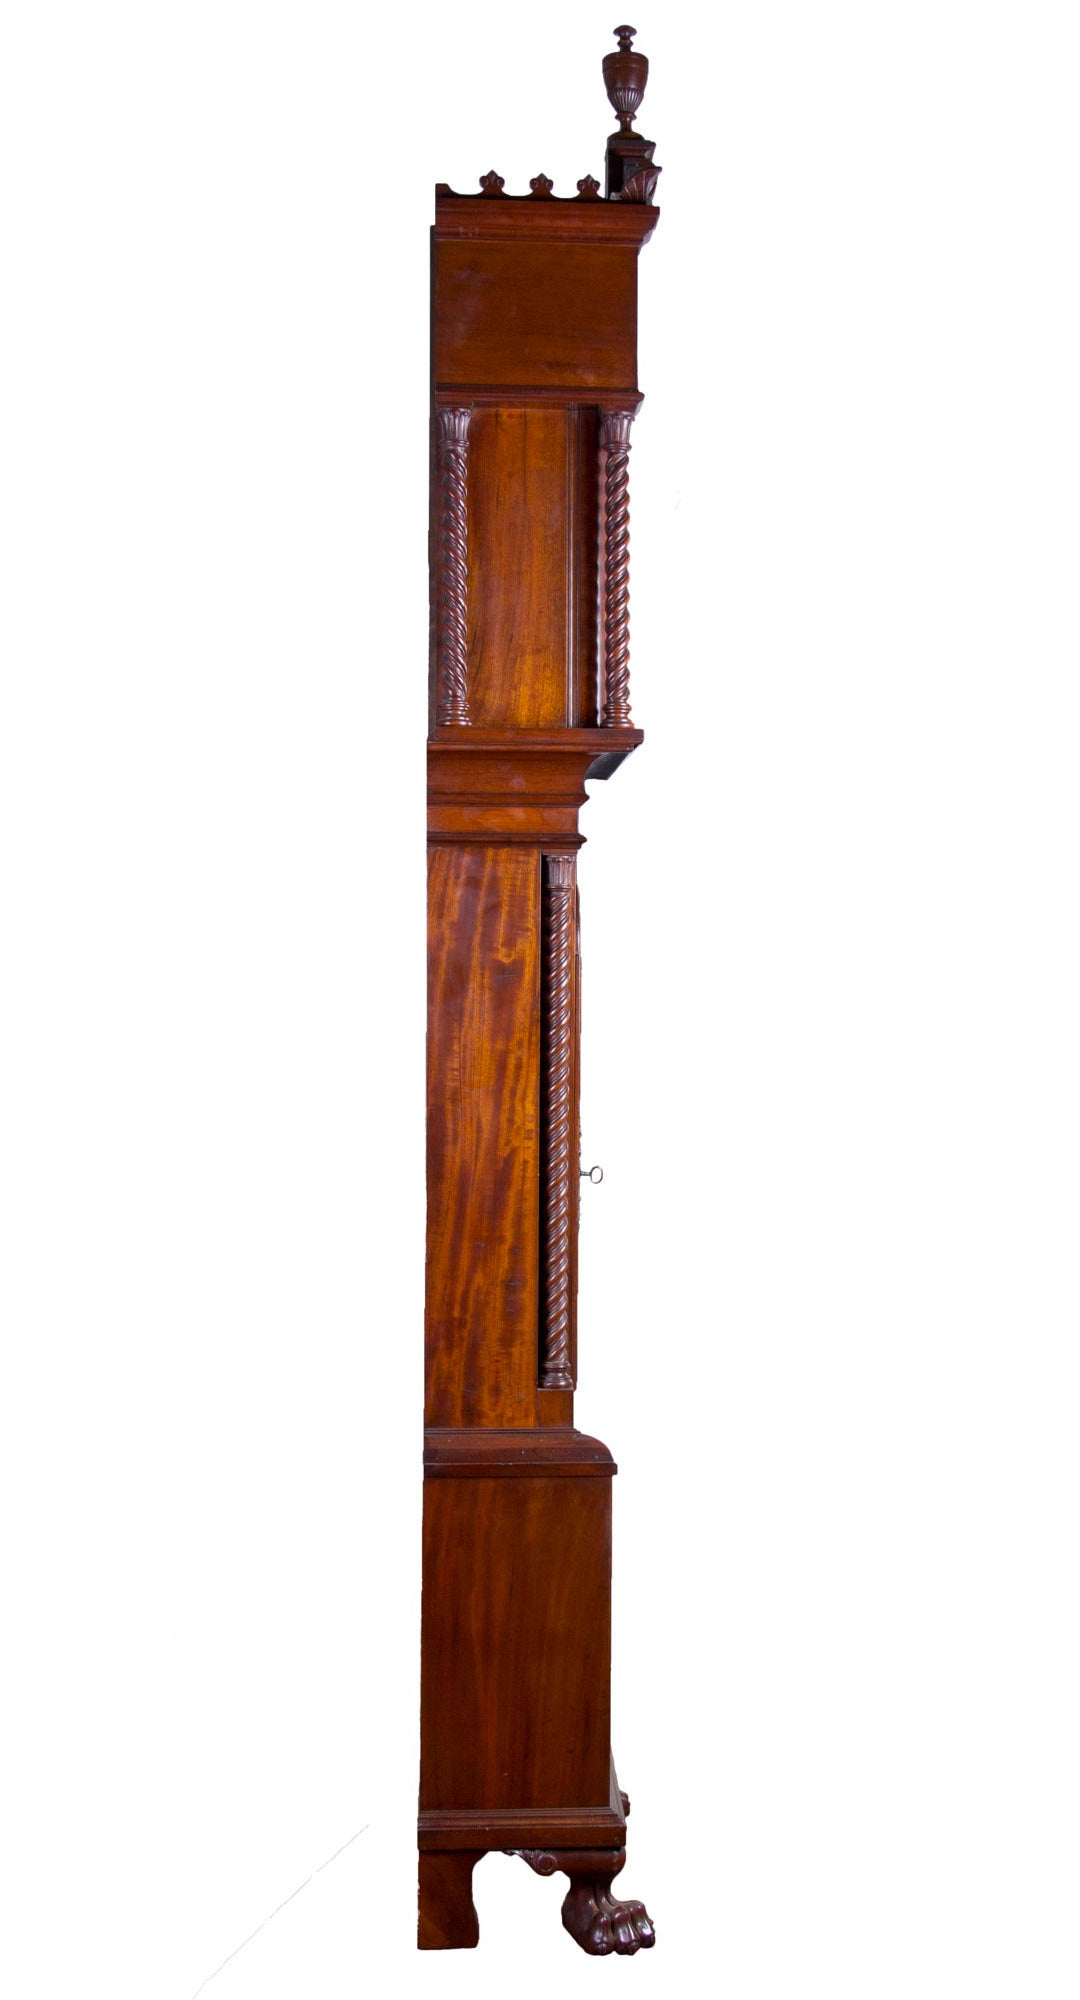 Walter Durfee Marquetry Galle Japanesque Inlay Tall Clock, Providence, circa 1900 2